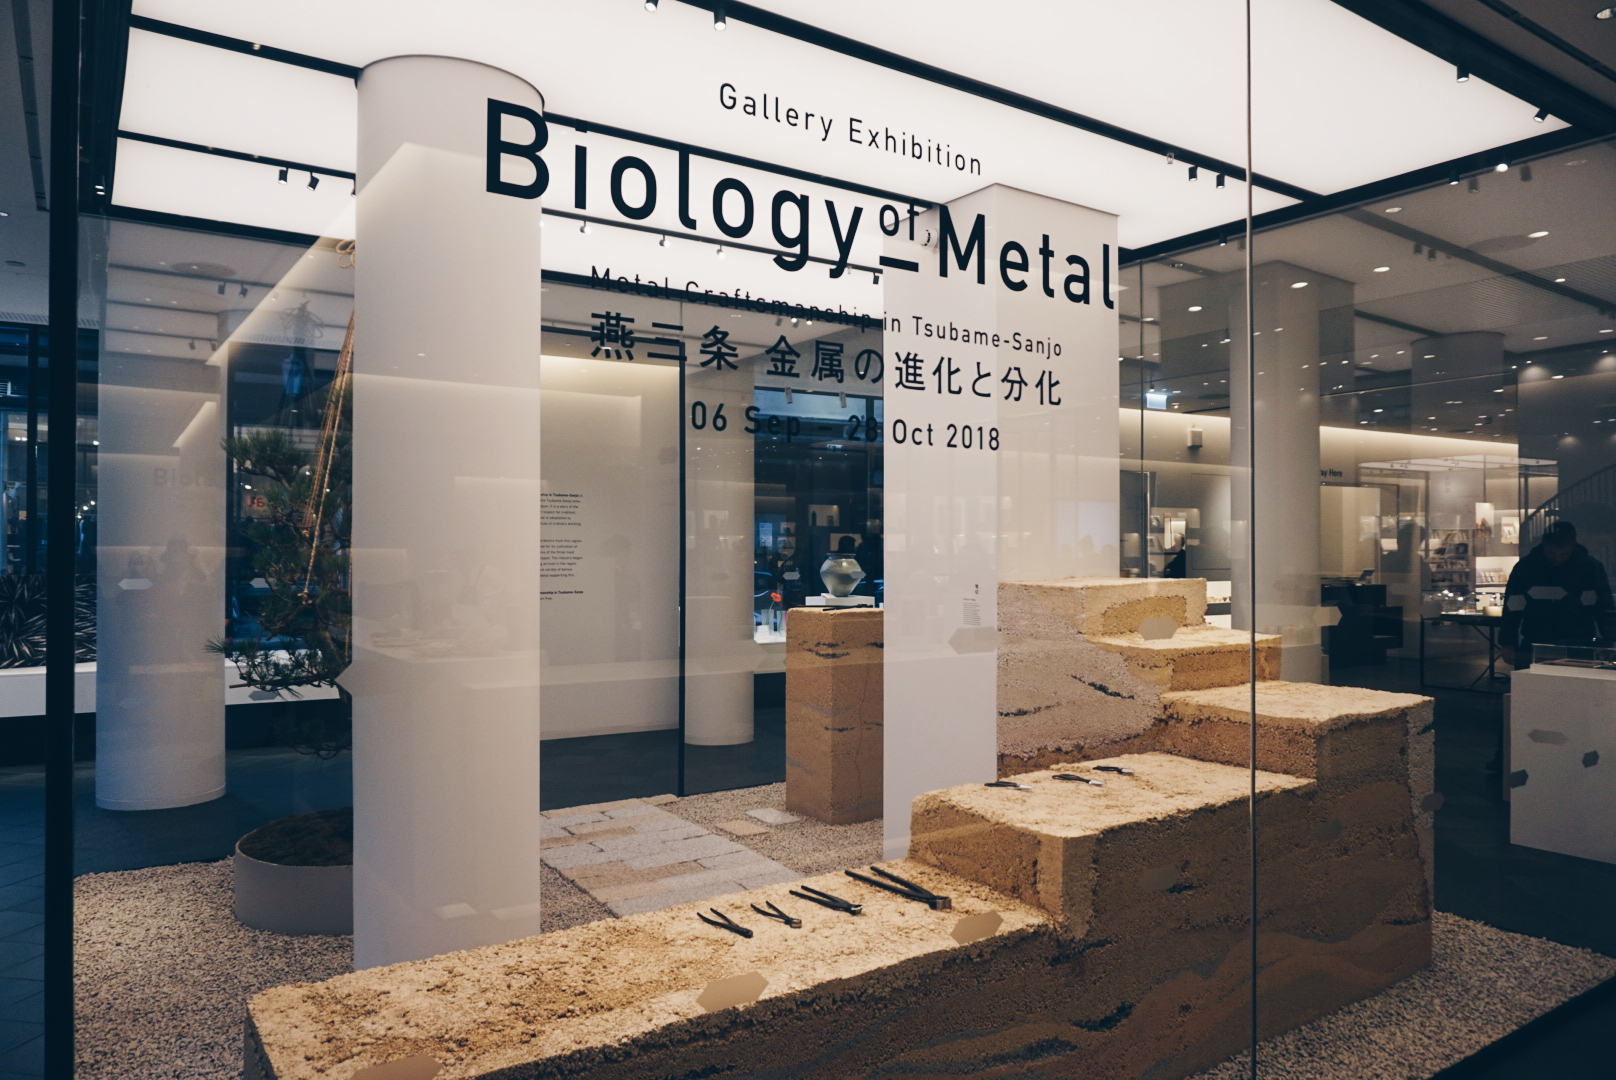 Japan House London Biology of Metal Exhibition | The LDN Gal